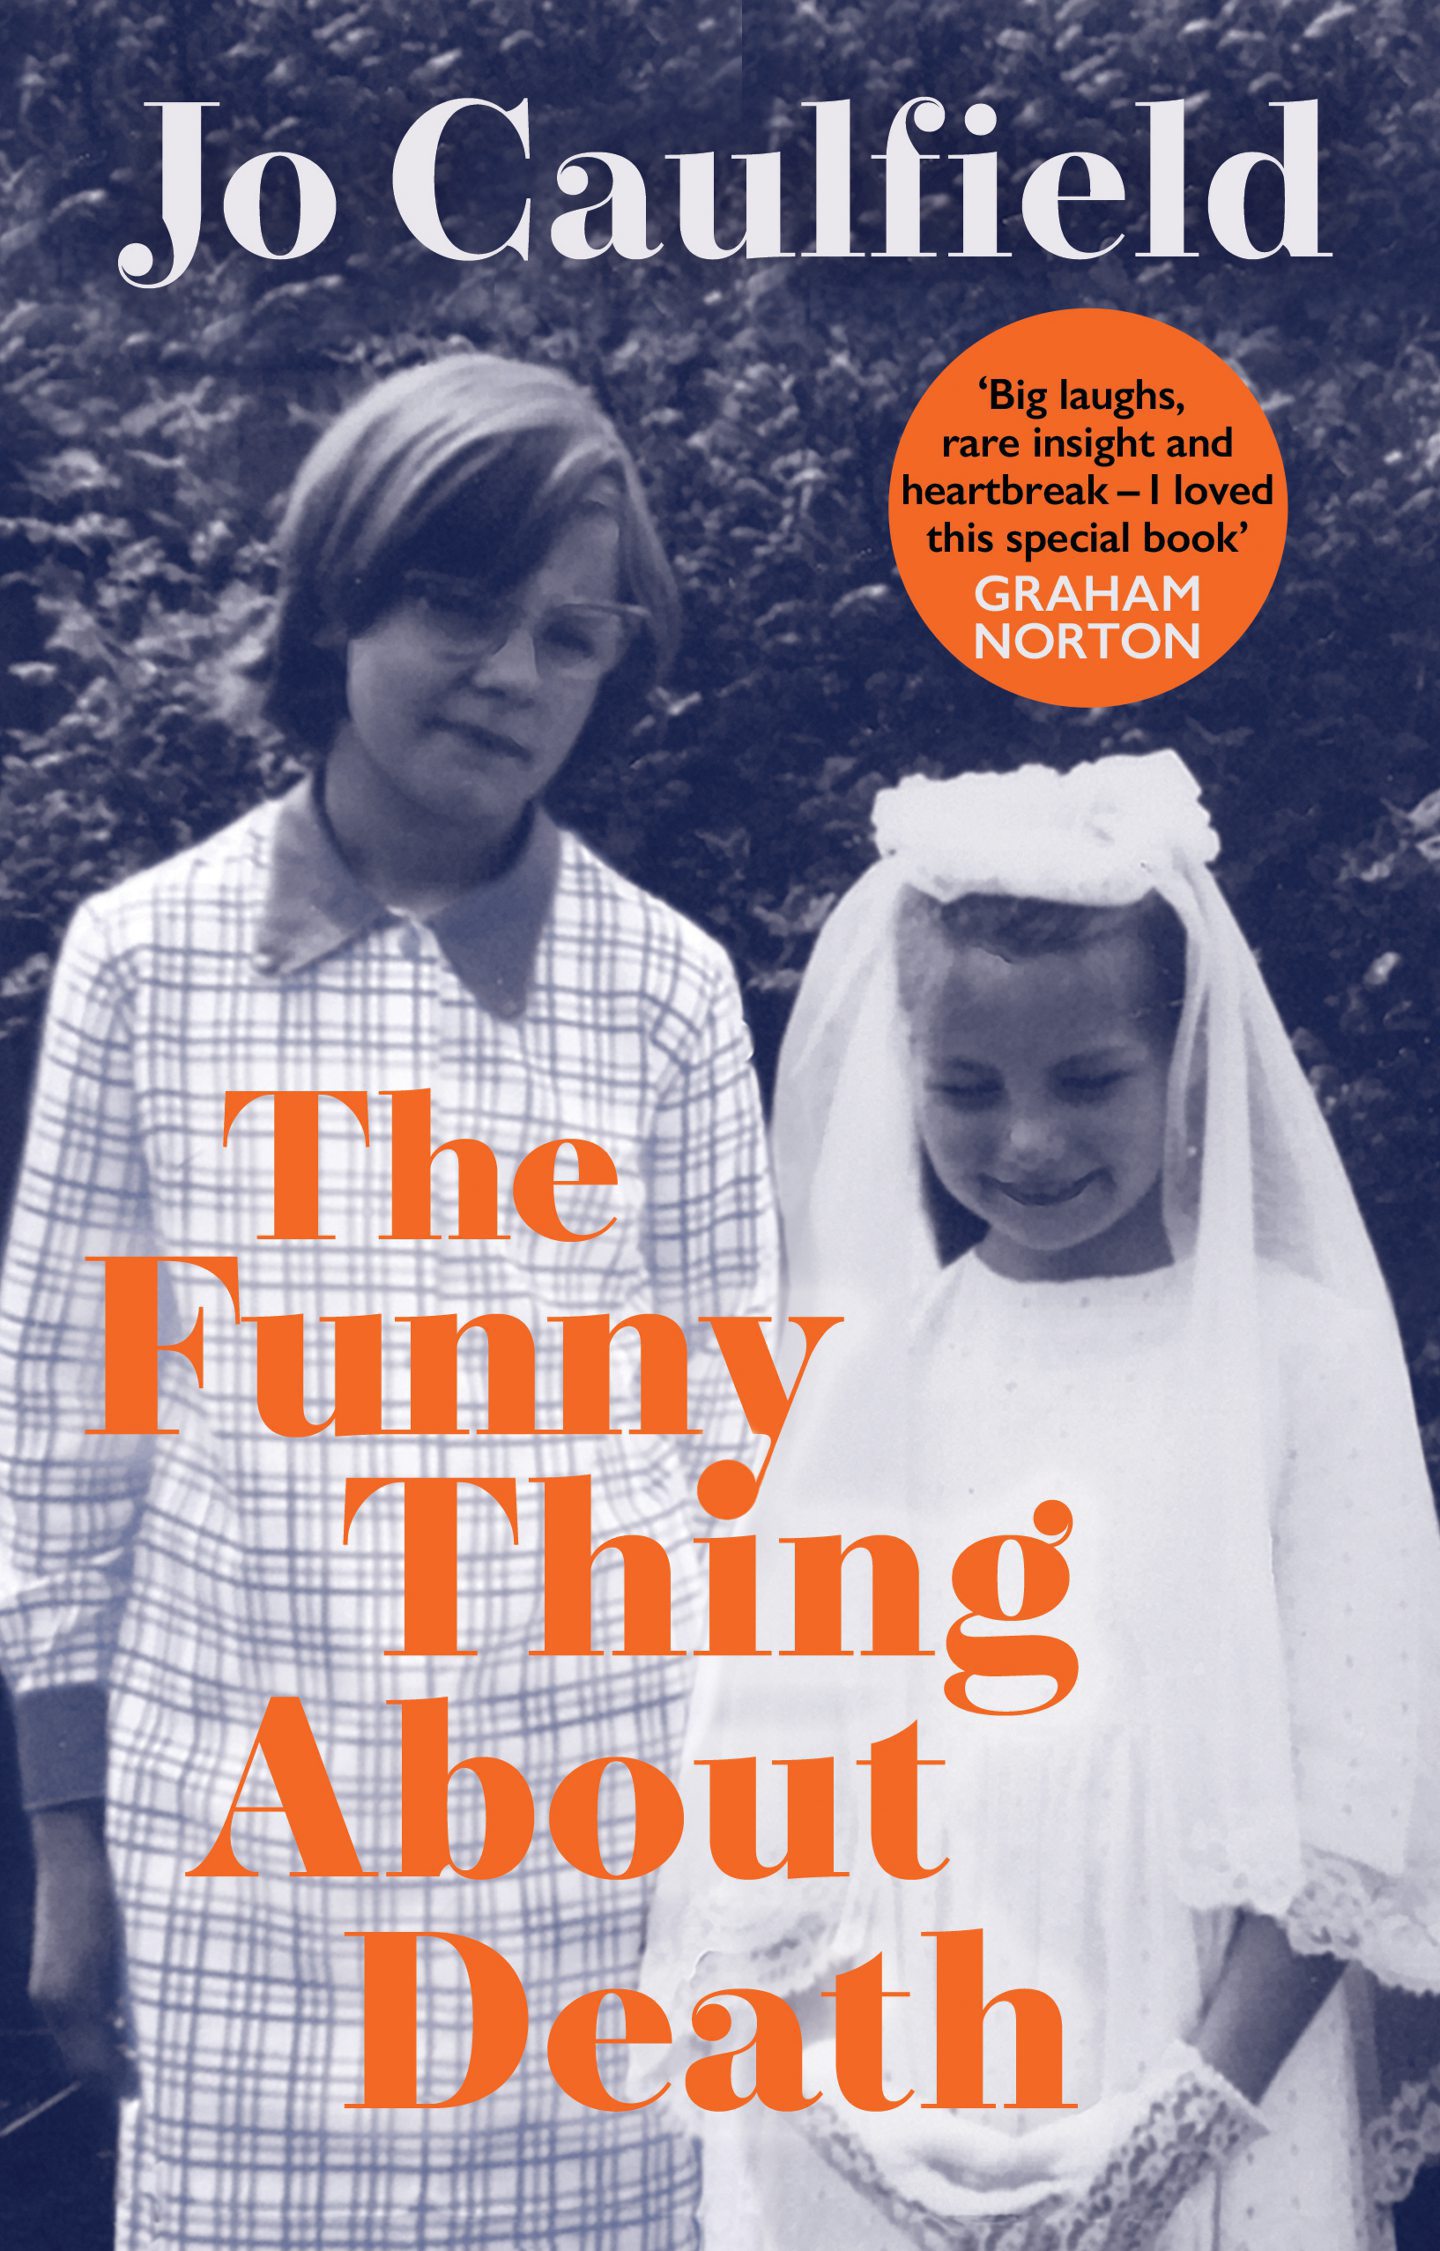 Image shows the cover page of The Funny Thing About Death by Jo Caulfield. A black and white photograph of the sisters on Jo's first communion day is the main image, with the title text in bold orange letters.